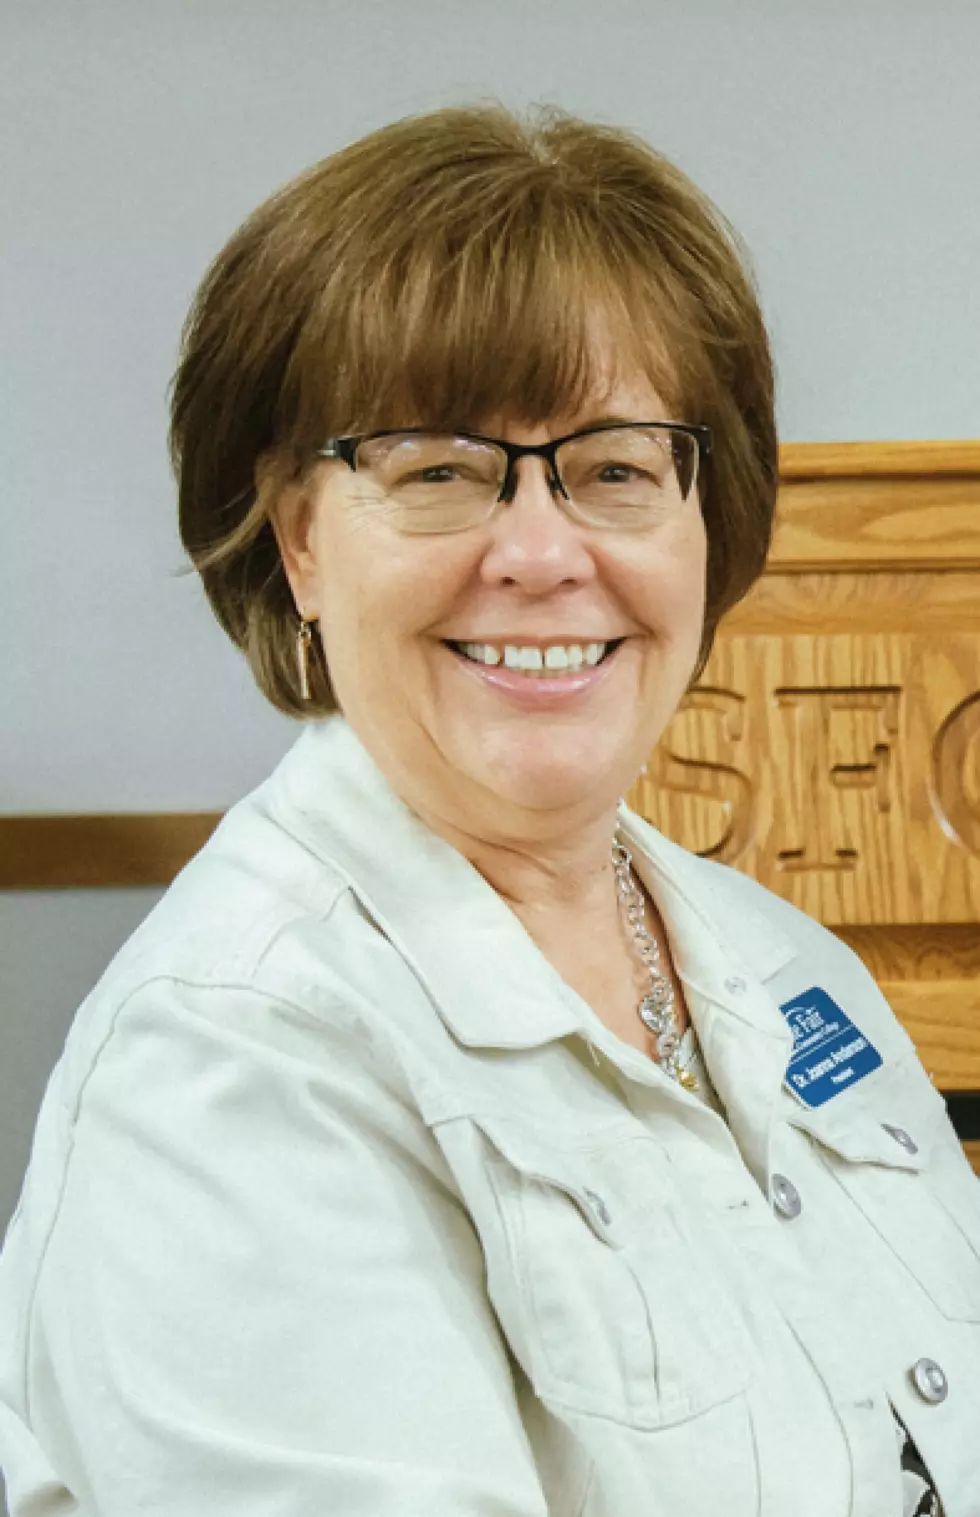 SFCC To Host Retirement Reception For President Anderson May 1